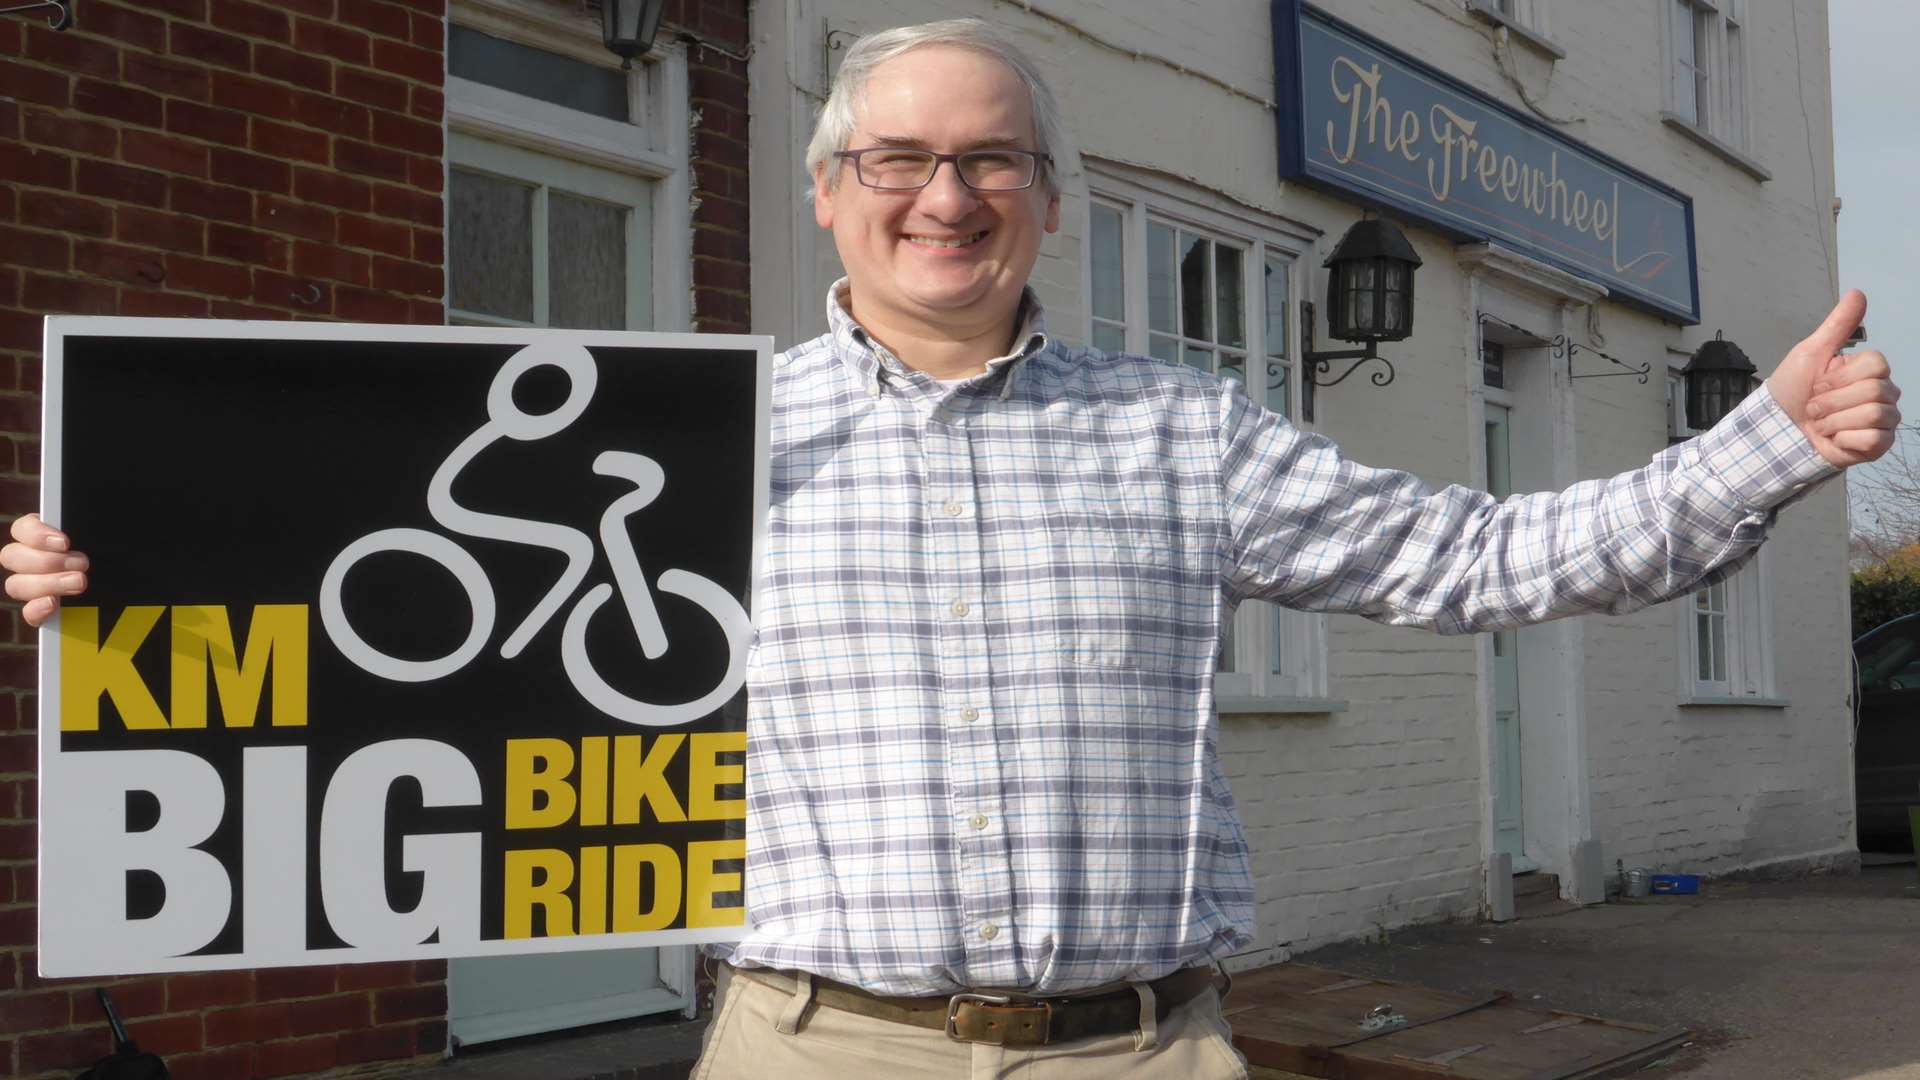 Adrian Oliver, founder of cycling pub and cafe The Freewheel in Graveney, Nr Faversham, announces support of the KM Big Bike Ride